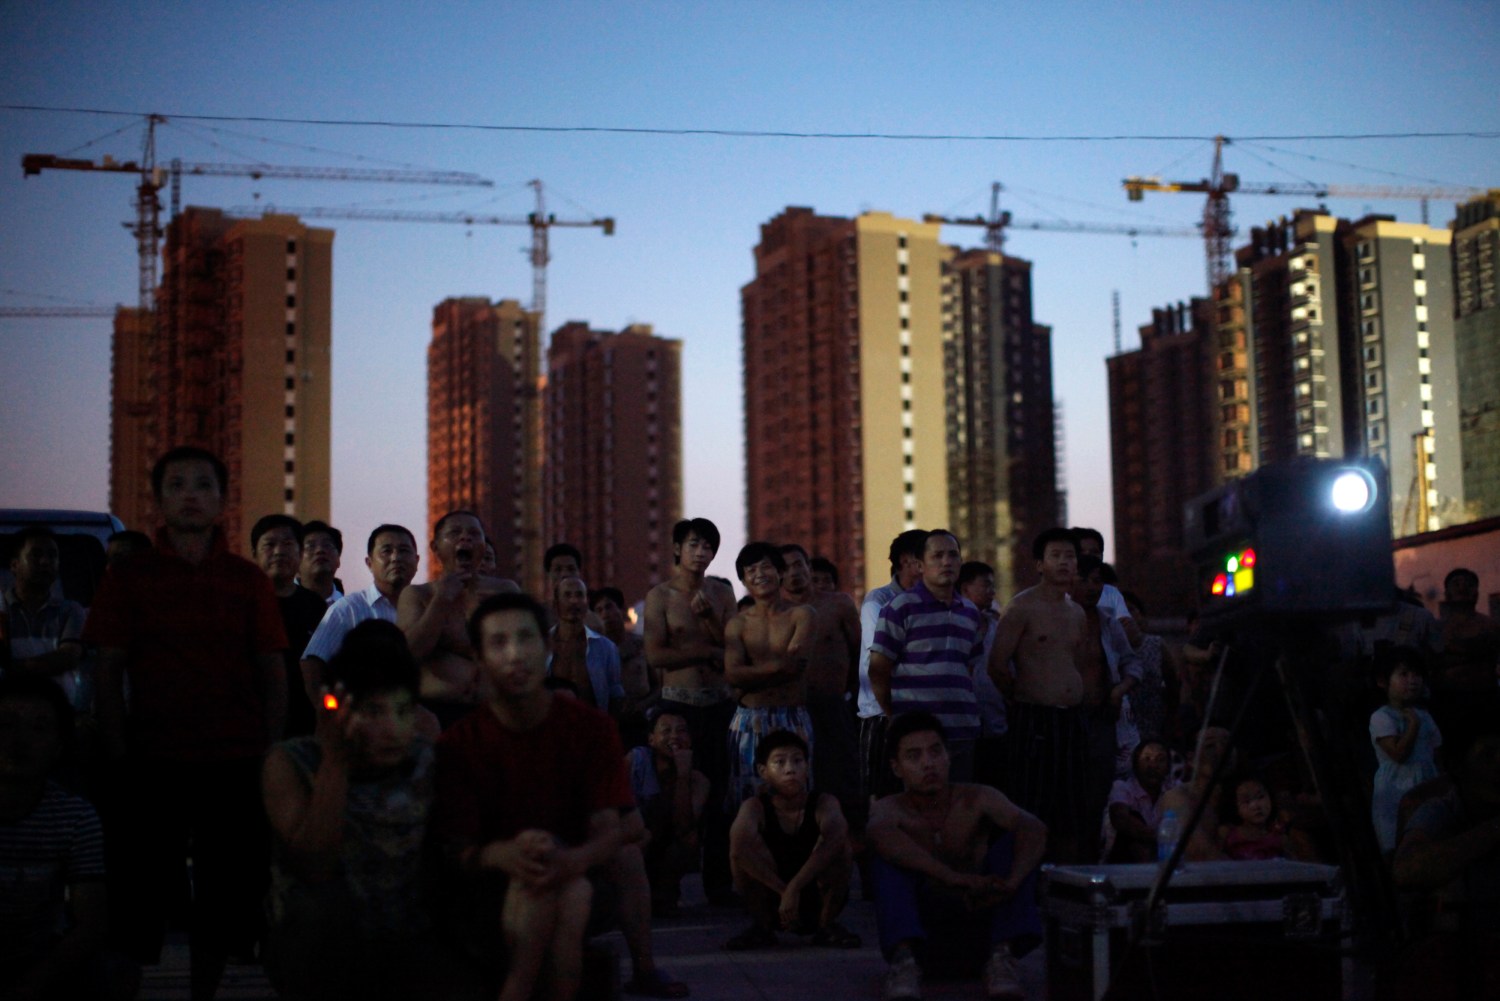 Migrant construction workers watch an open air movie near their dormitories after a shift at a residential construction site in Shanghai July 15, 2013. The construction site is among a new developing residential area located in Jiading district of suburban Shanghai, some 30 kilometres from the city centre. According to data from the World Bank, 68 percent of China's female population aged 15 and above participate in the labour force, compared to 58 percent in the United States, 51 percent in France, and 53 percent in Germany. Around a third of China's millions of rural-urban migrant workers are women and according to an academic paper published 2010, they also earn around a third less than their male equivalents. Picture taken July 15, 2013. REUTERS/Aly Song (CHINA - Tags: BUSINESS EMPLOYMENT SOCIETY CONSTRUCTION) ATTENTION EDITORS: PICTURE 28 OF 29 FOR PACKAGE 'CHINA'S MIGRANT WORKFORCE'. TO FIND ALL IMAGES SEARCH 'RURAL-URBAN SONG' - RTX13N5Z